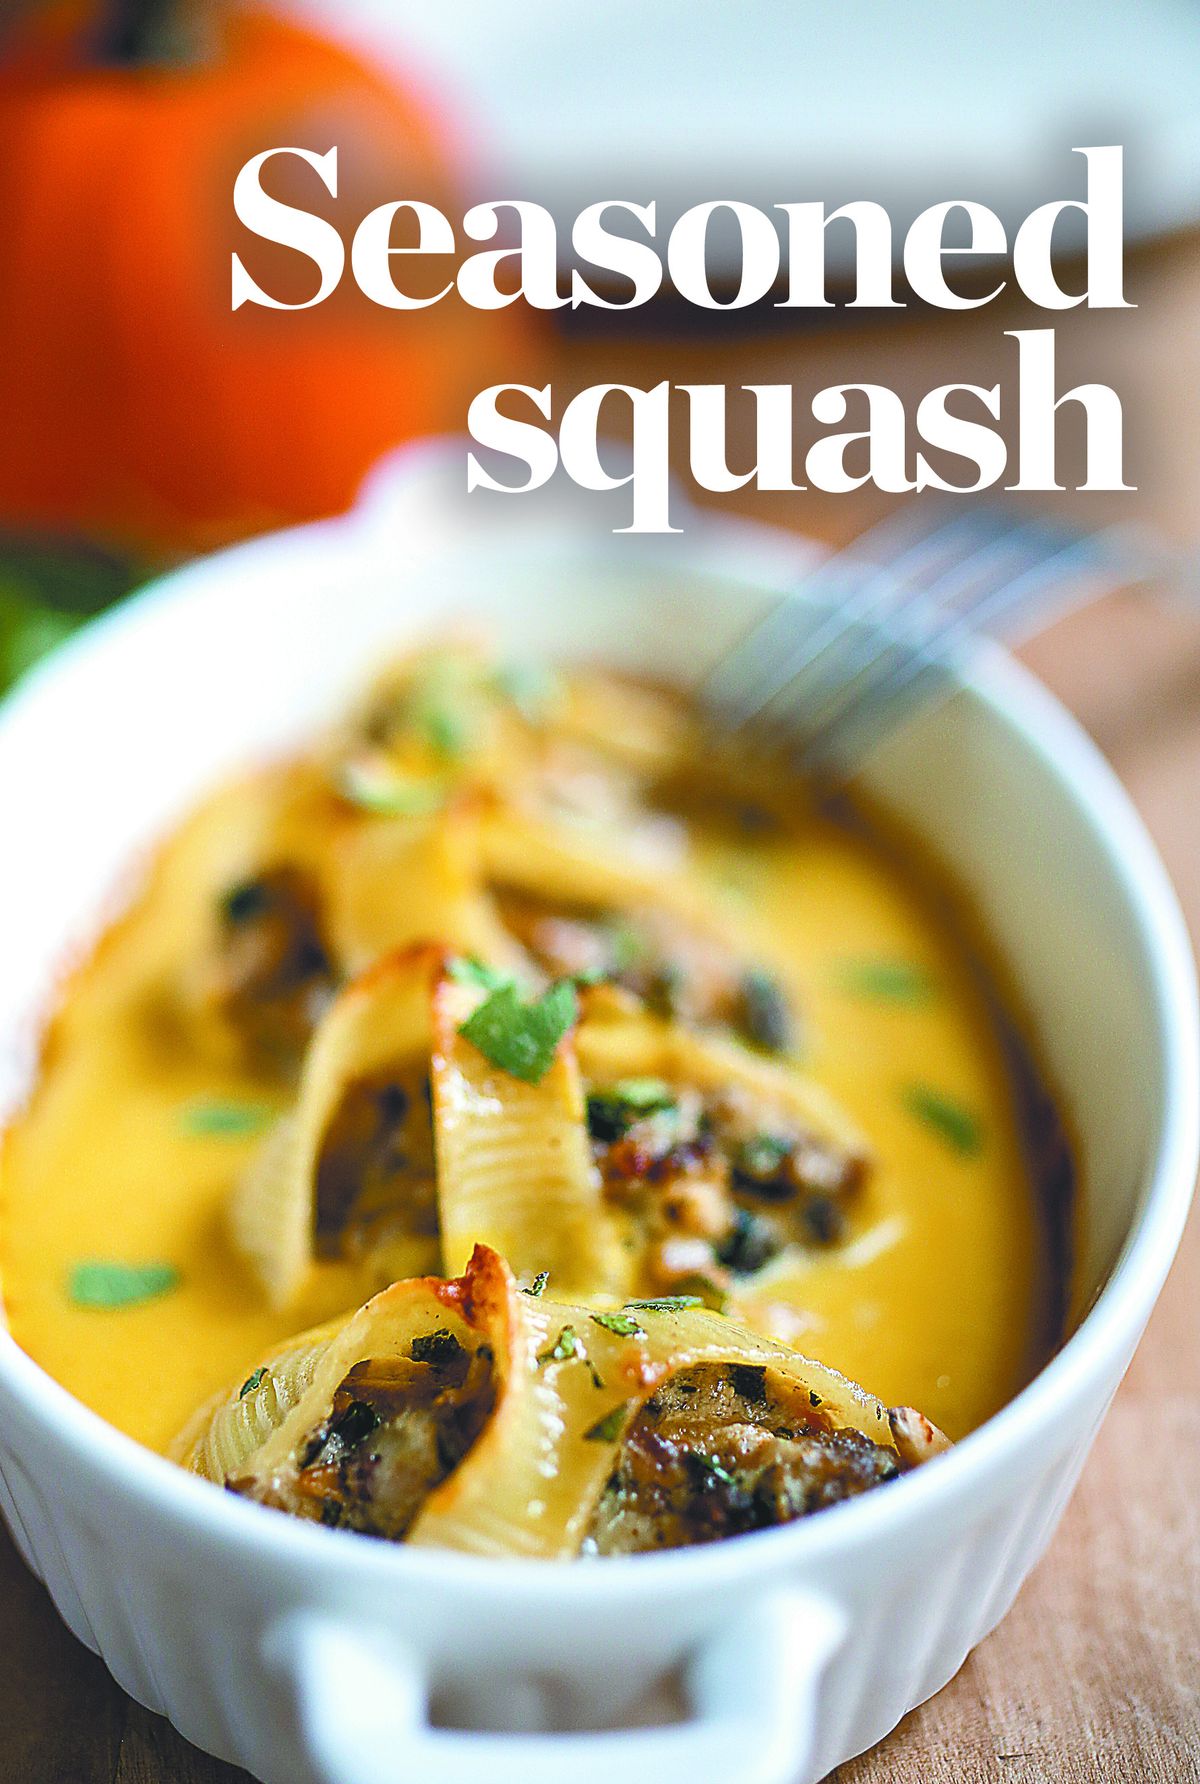 « Winter squash, with their thick skins and interesting shapes, can be intimidating. But the cold-weather staples are versatile and flavorful. Try stuffed pasta shells by Spokane chef Sylvia Fountaine.